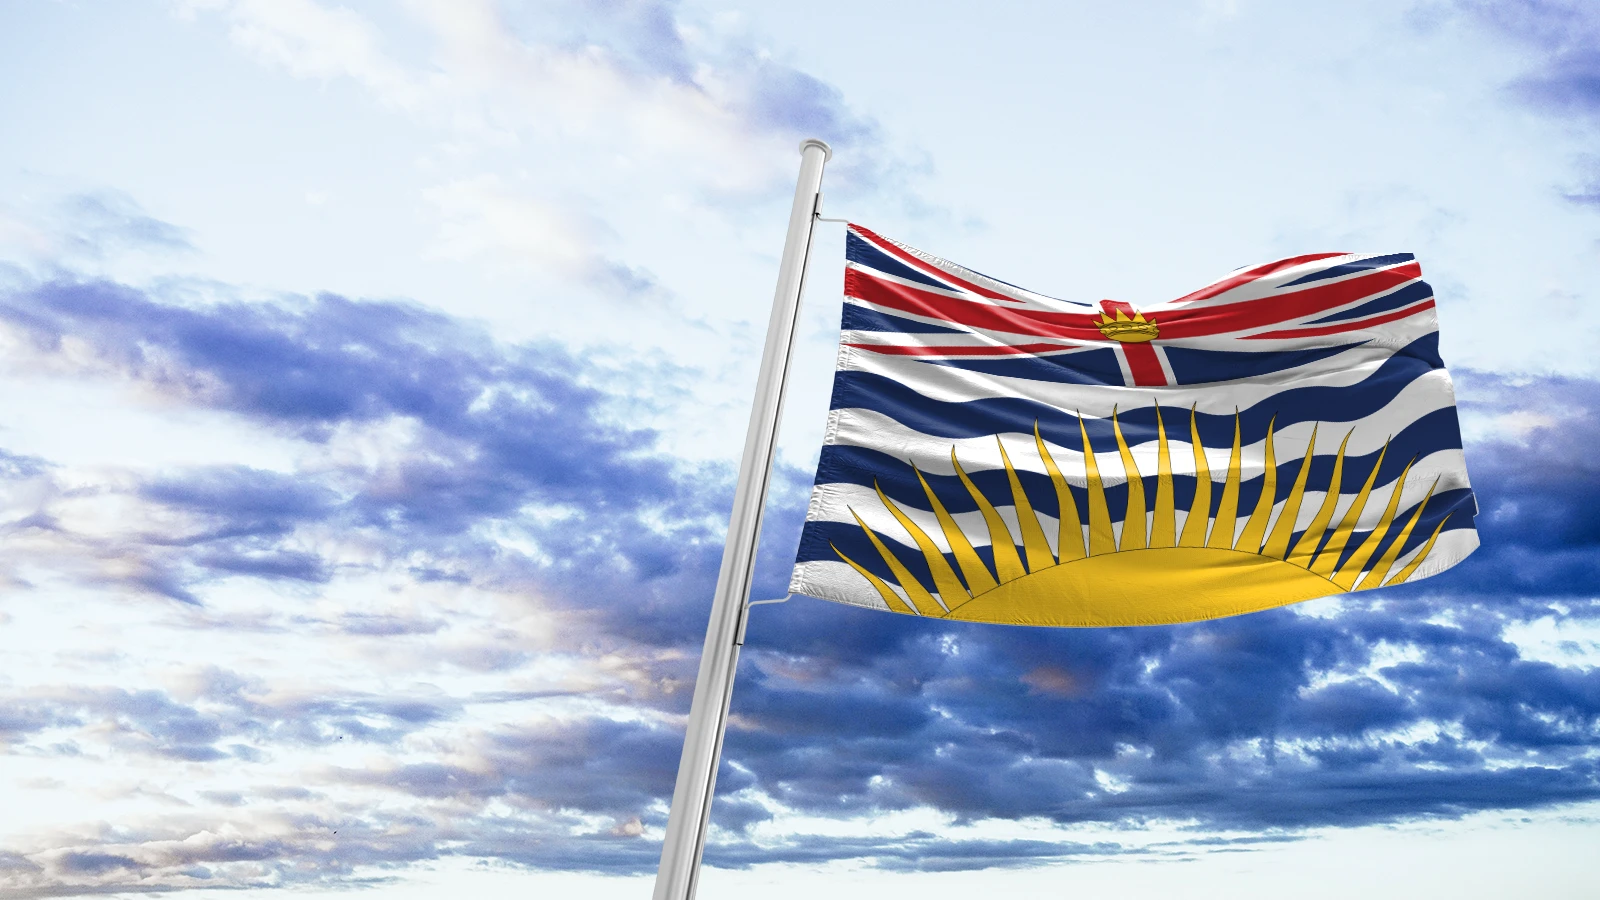 British Columbia Flag blowing in the wind